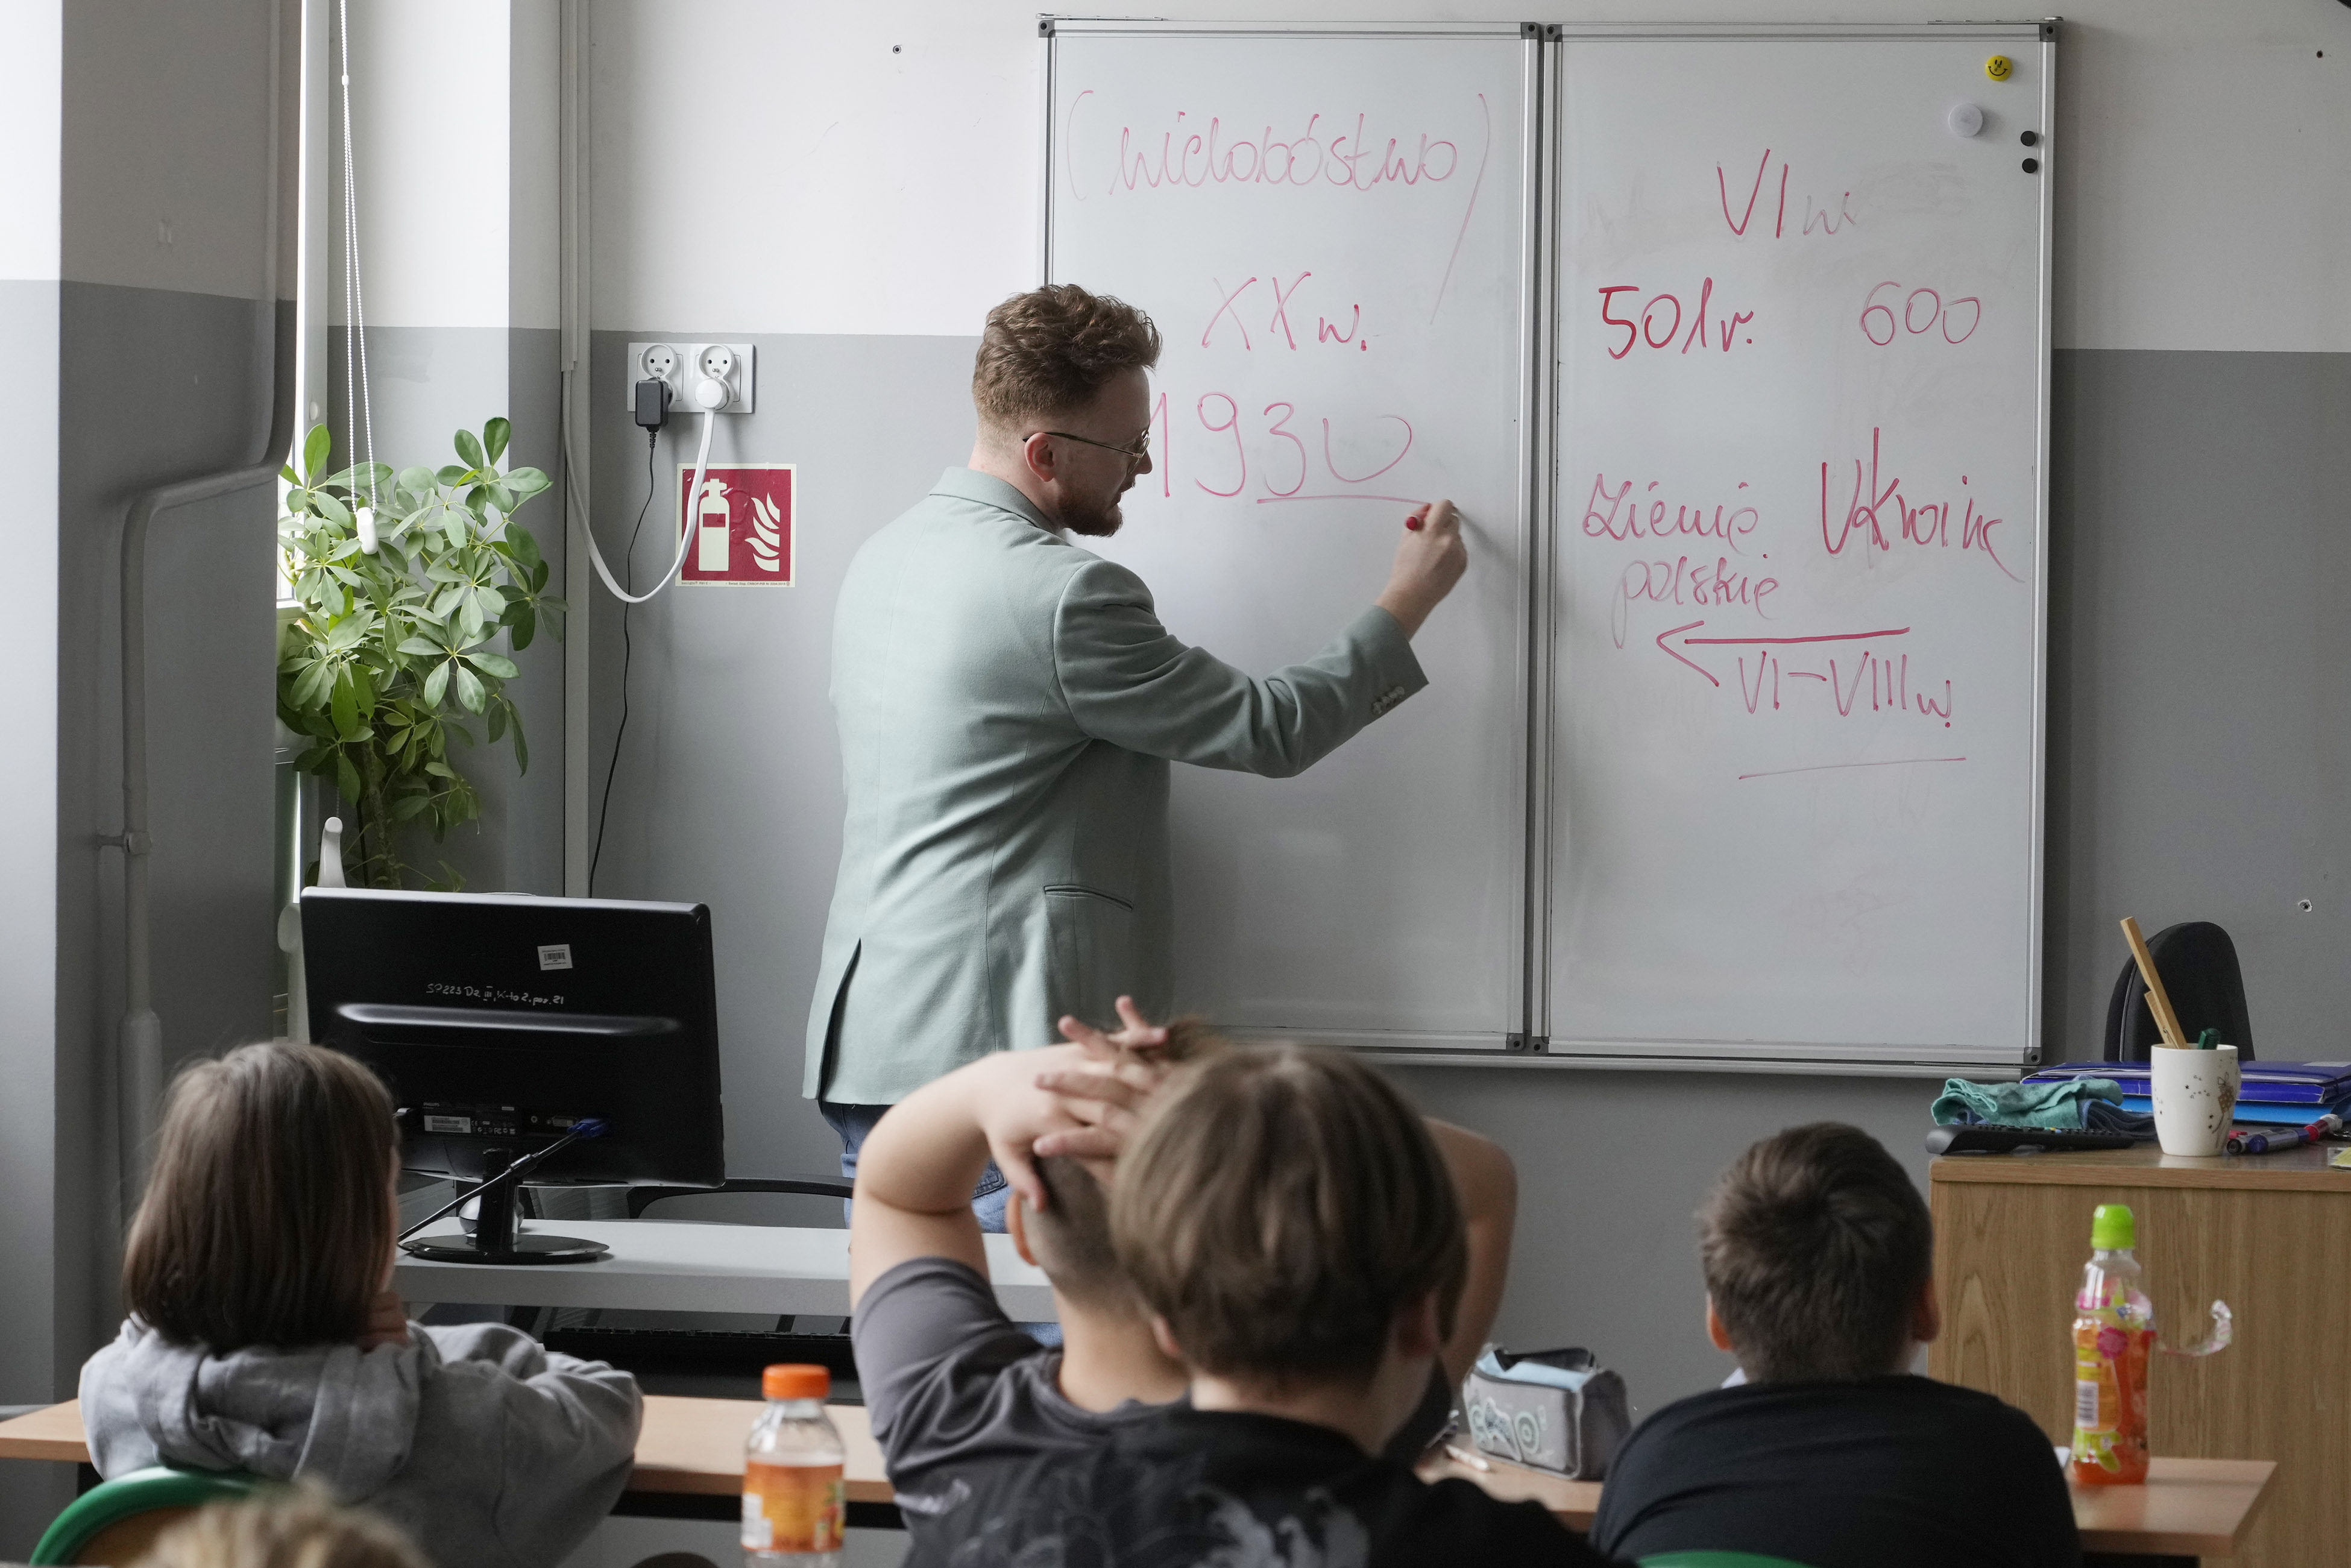 Poland’s government has ordered strict limits on the amount of homework that teachers can impose on the lower grades. Photo: AP